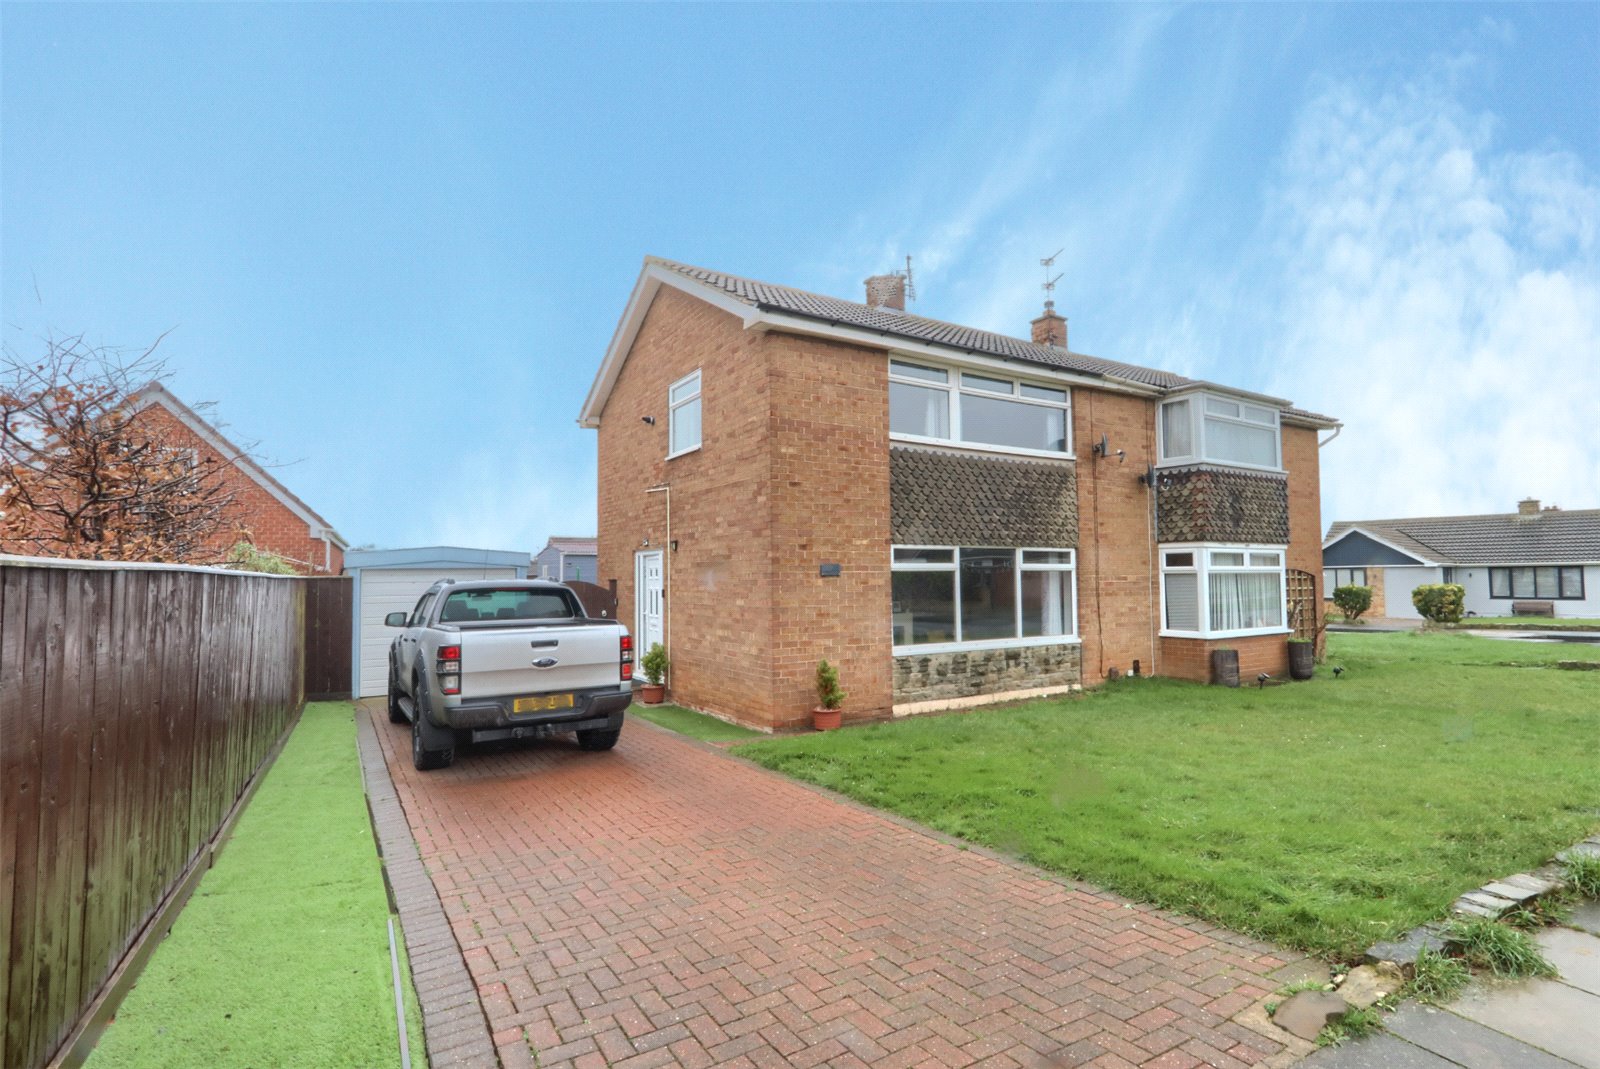 3 bed house for sale in Warwick Road, Redcar  - Property Image 1